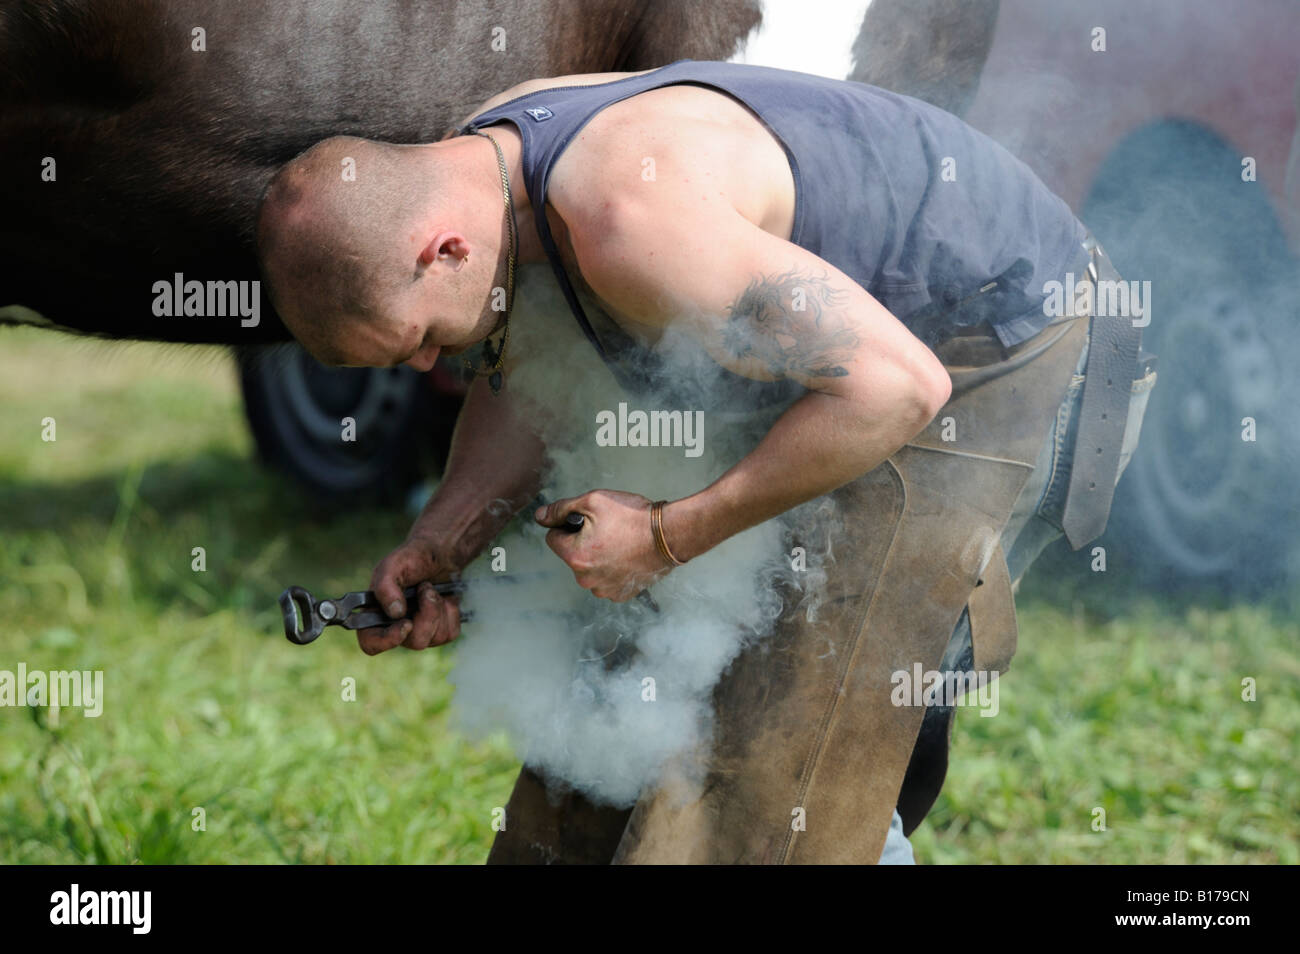 Farrier shoeing a horse. Appleby Horse Fair. Appleby-in-Westmorland, Cumbria, England, United Kingdom, Europe. Stock Photo